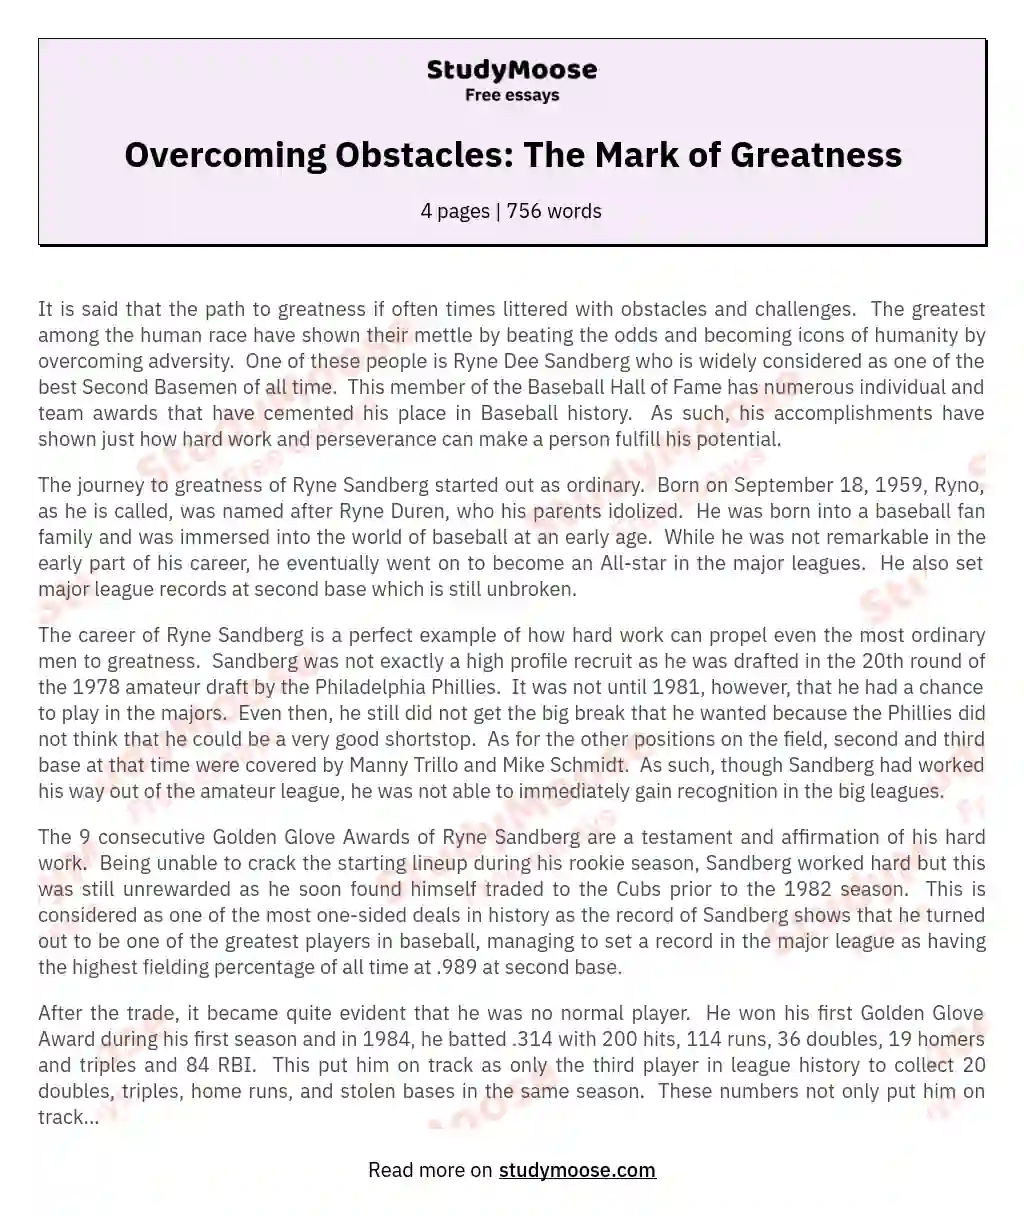 Overcoming Obstacles: The Mark of Greatness essay